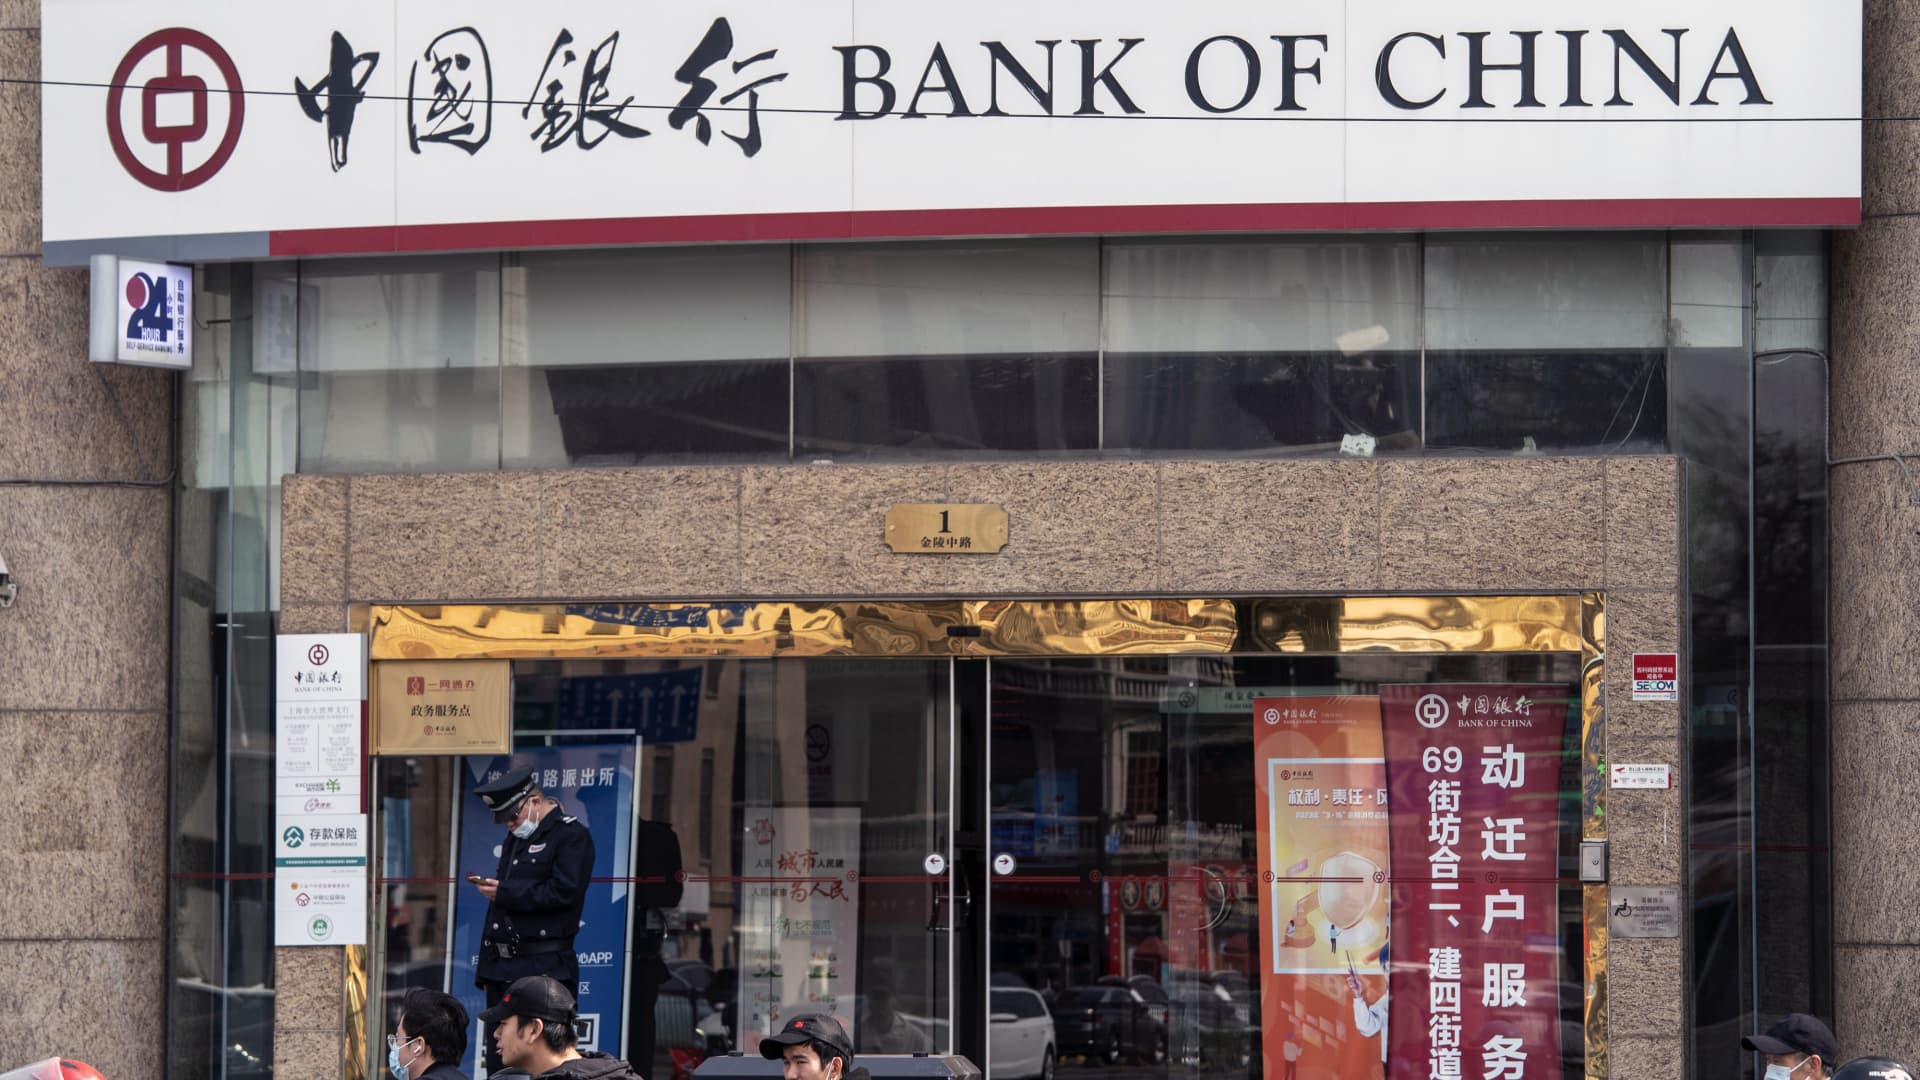 20-fascinating-facts-about-bank-of-china-boc